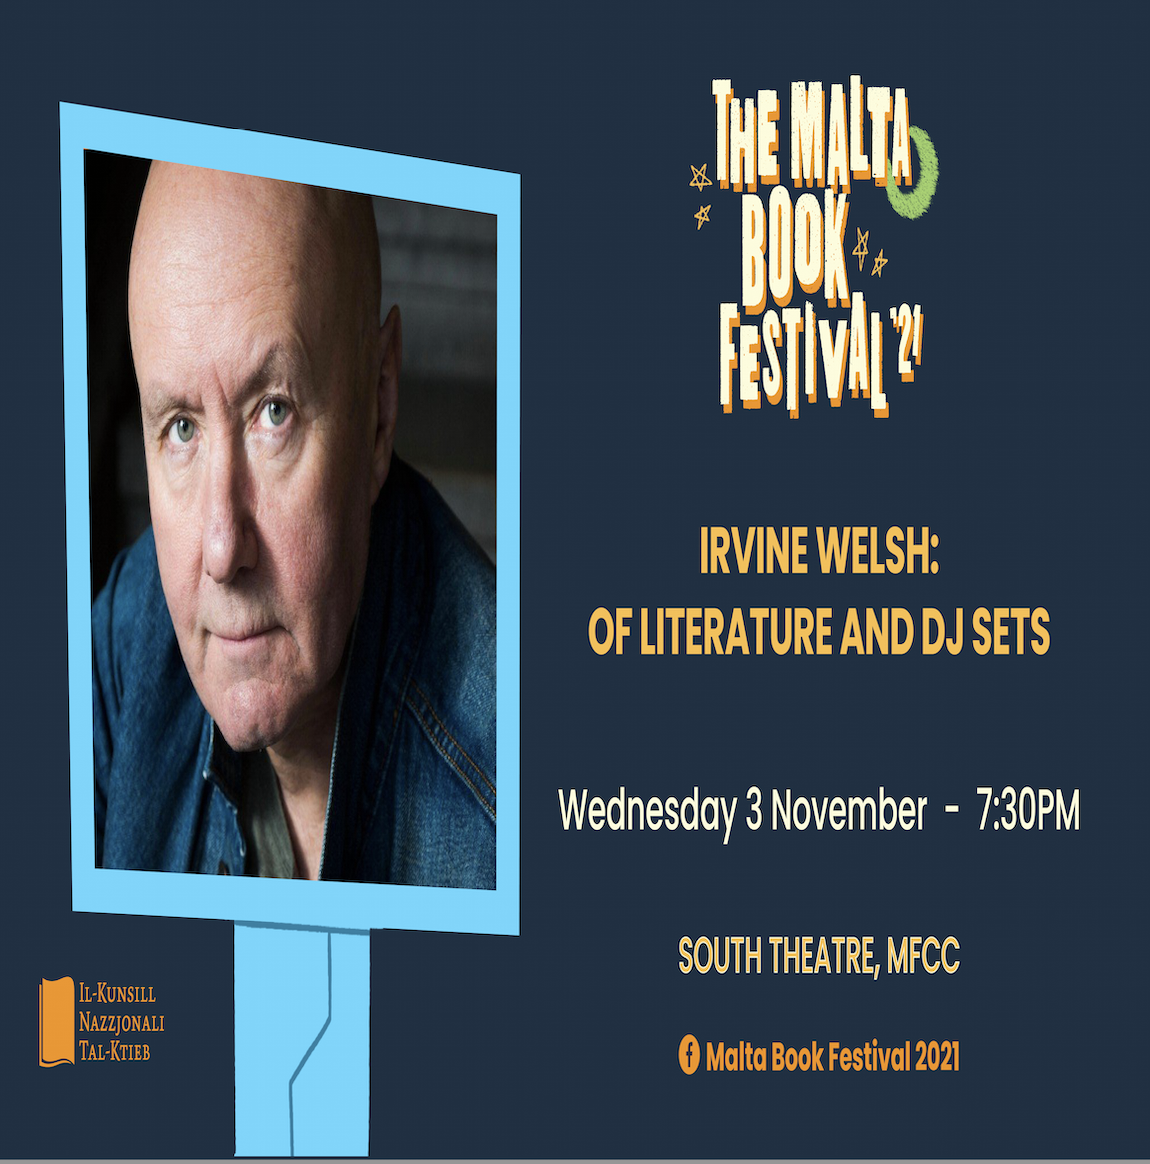 The Malta Book Festival 2021: Irvine Welsh: Of Literature and DJ Sets - 03/11/2021 poster